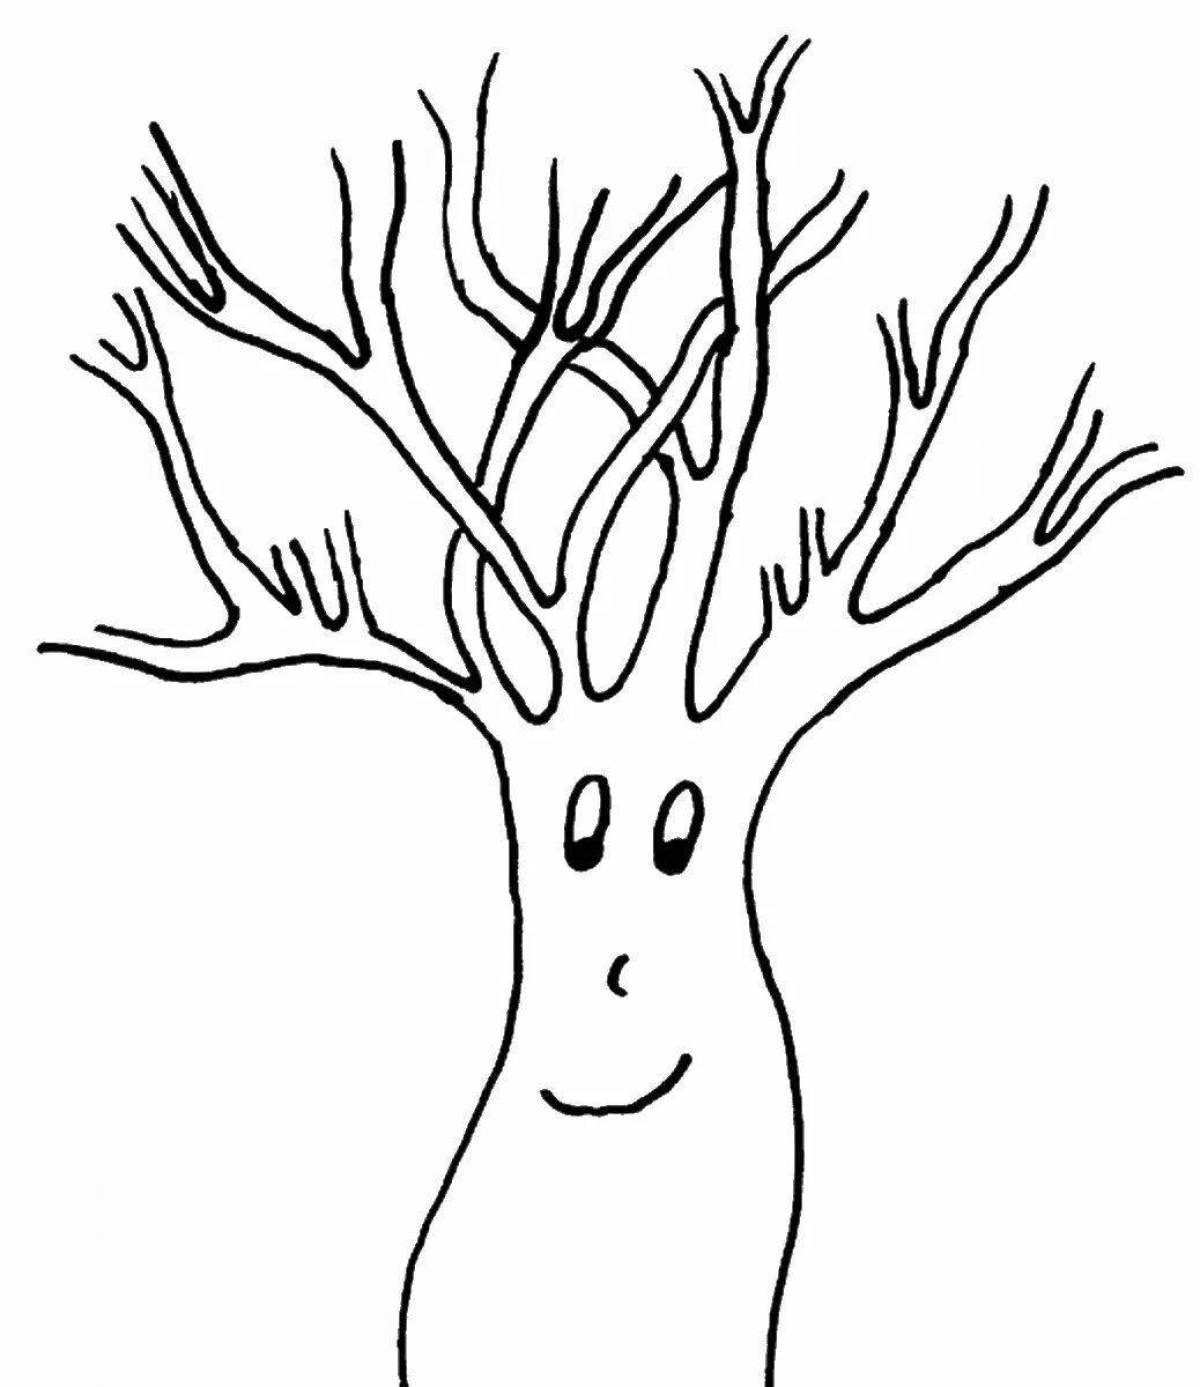 Creative tree trunk coloring for kids